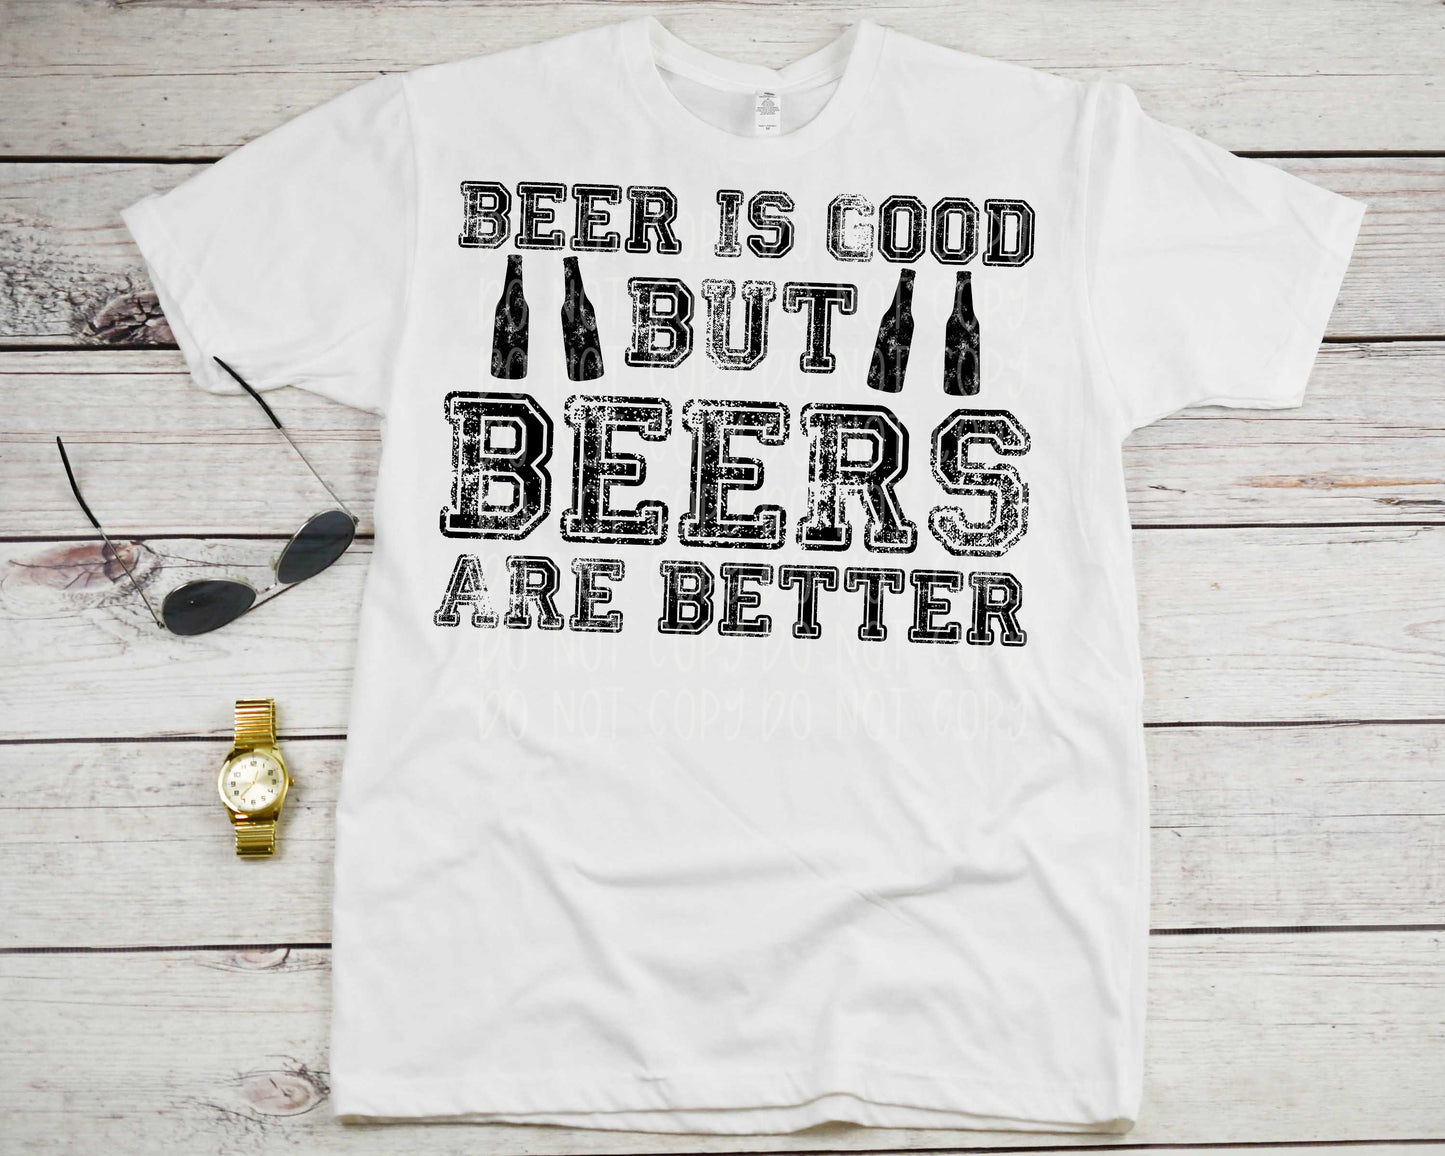 Beer is good but beers are better